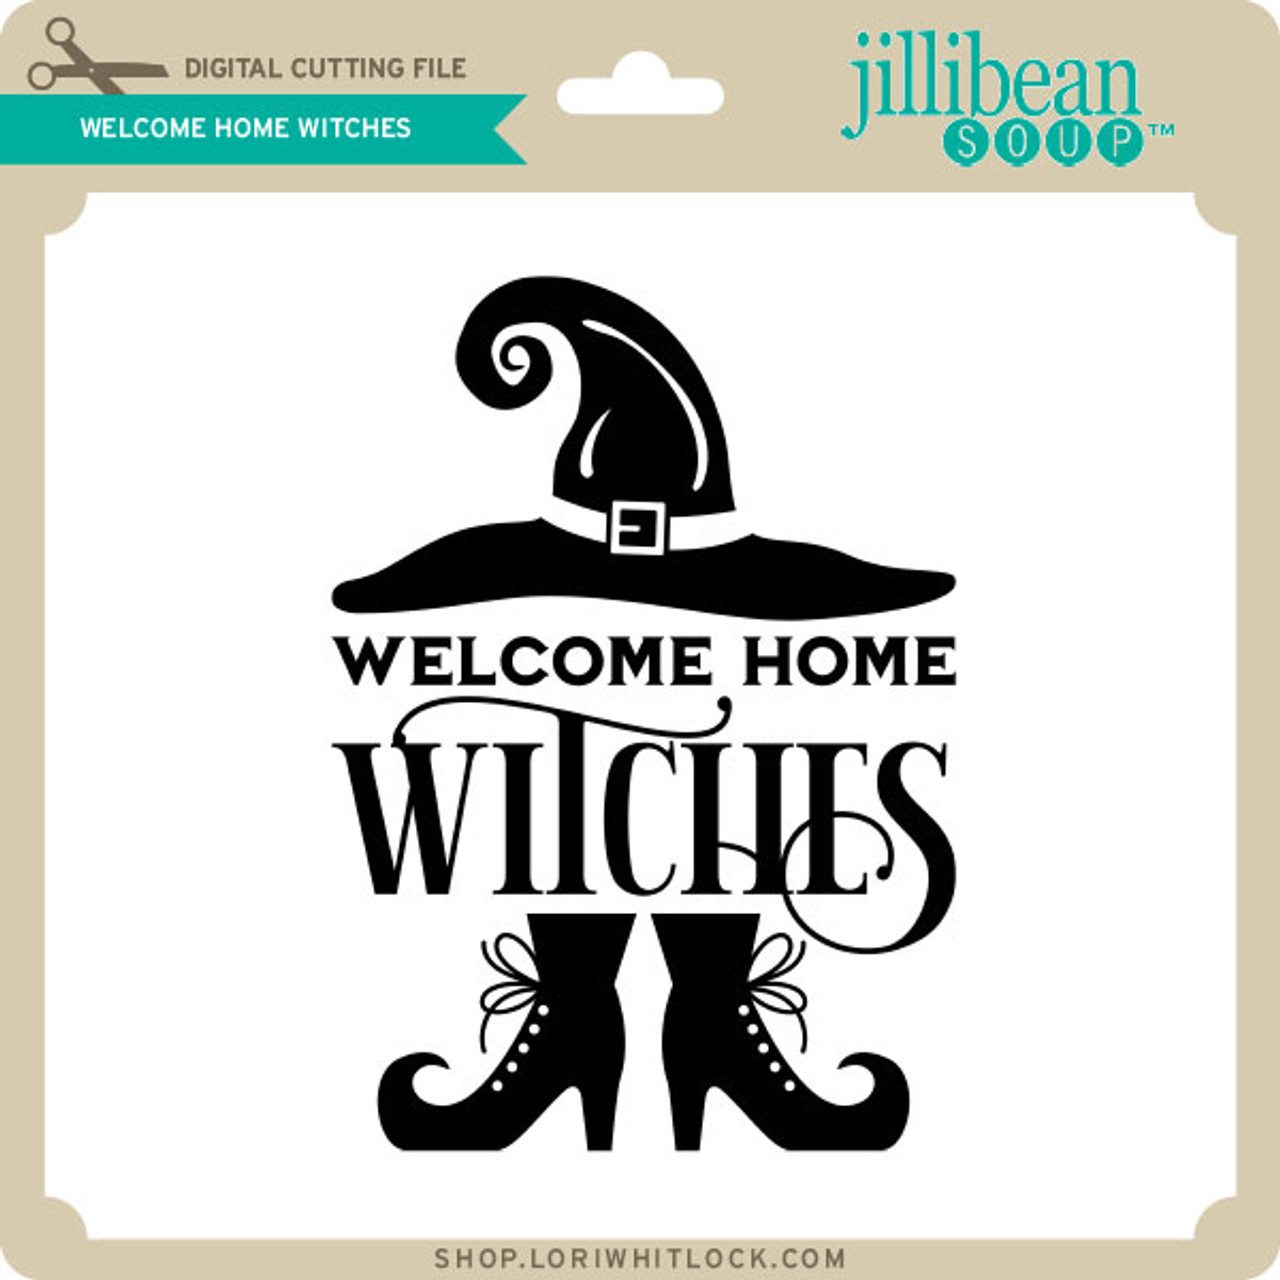 Welcome Home Witches - Lori Whitlock's SVG Shop